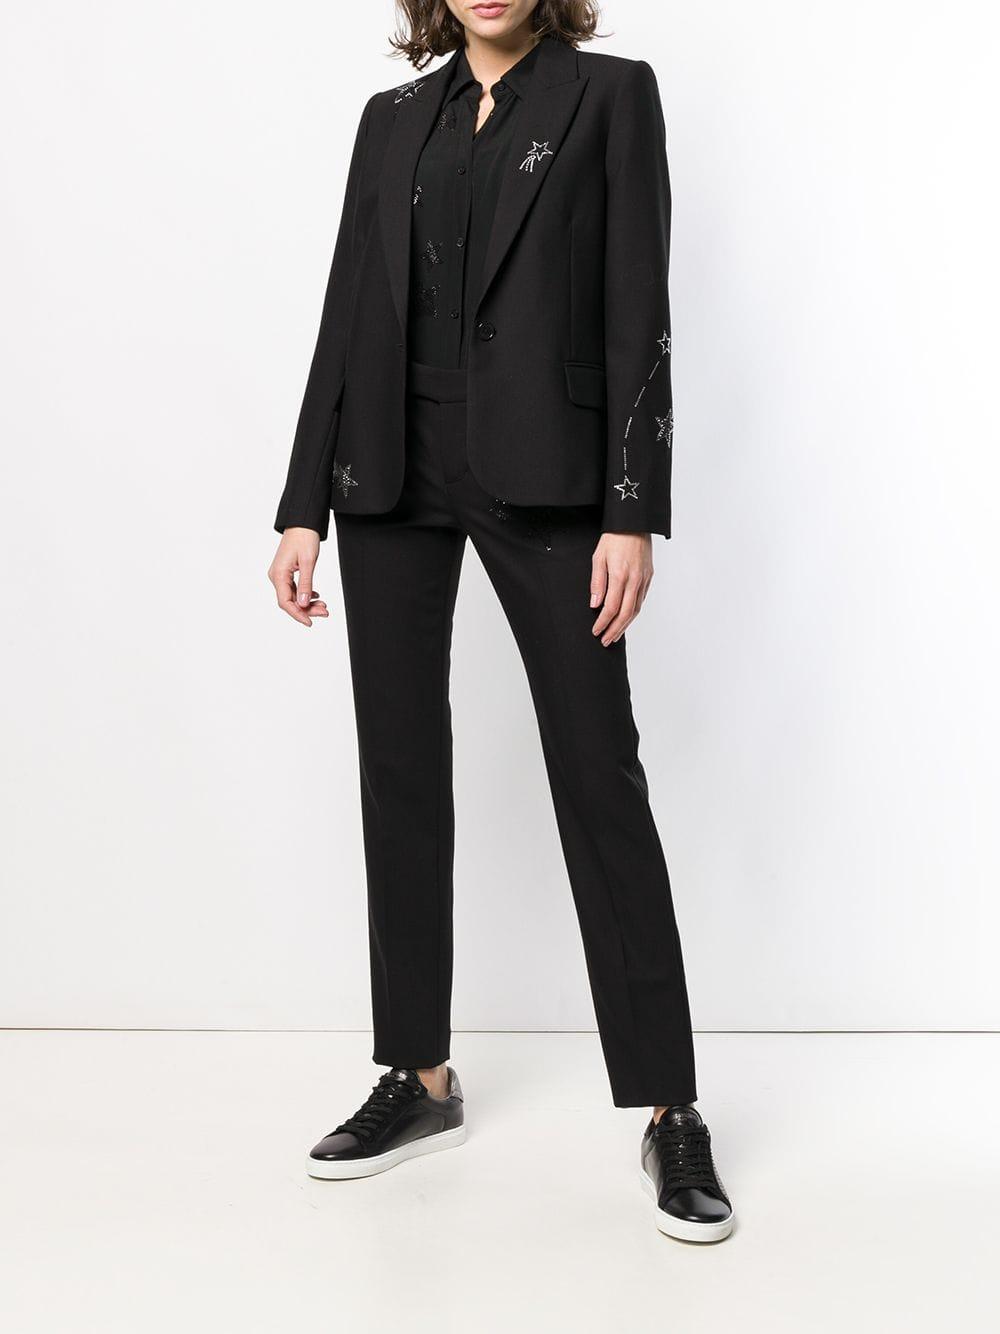 Zadig & Voltaire Synthetic Star Embellished Blazer in Black | Lyst